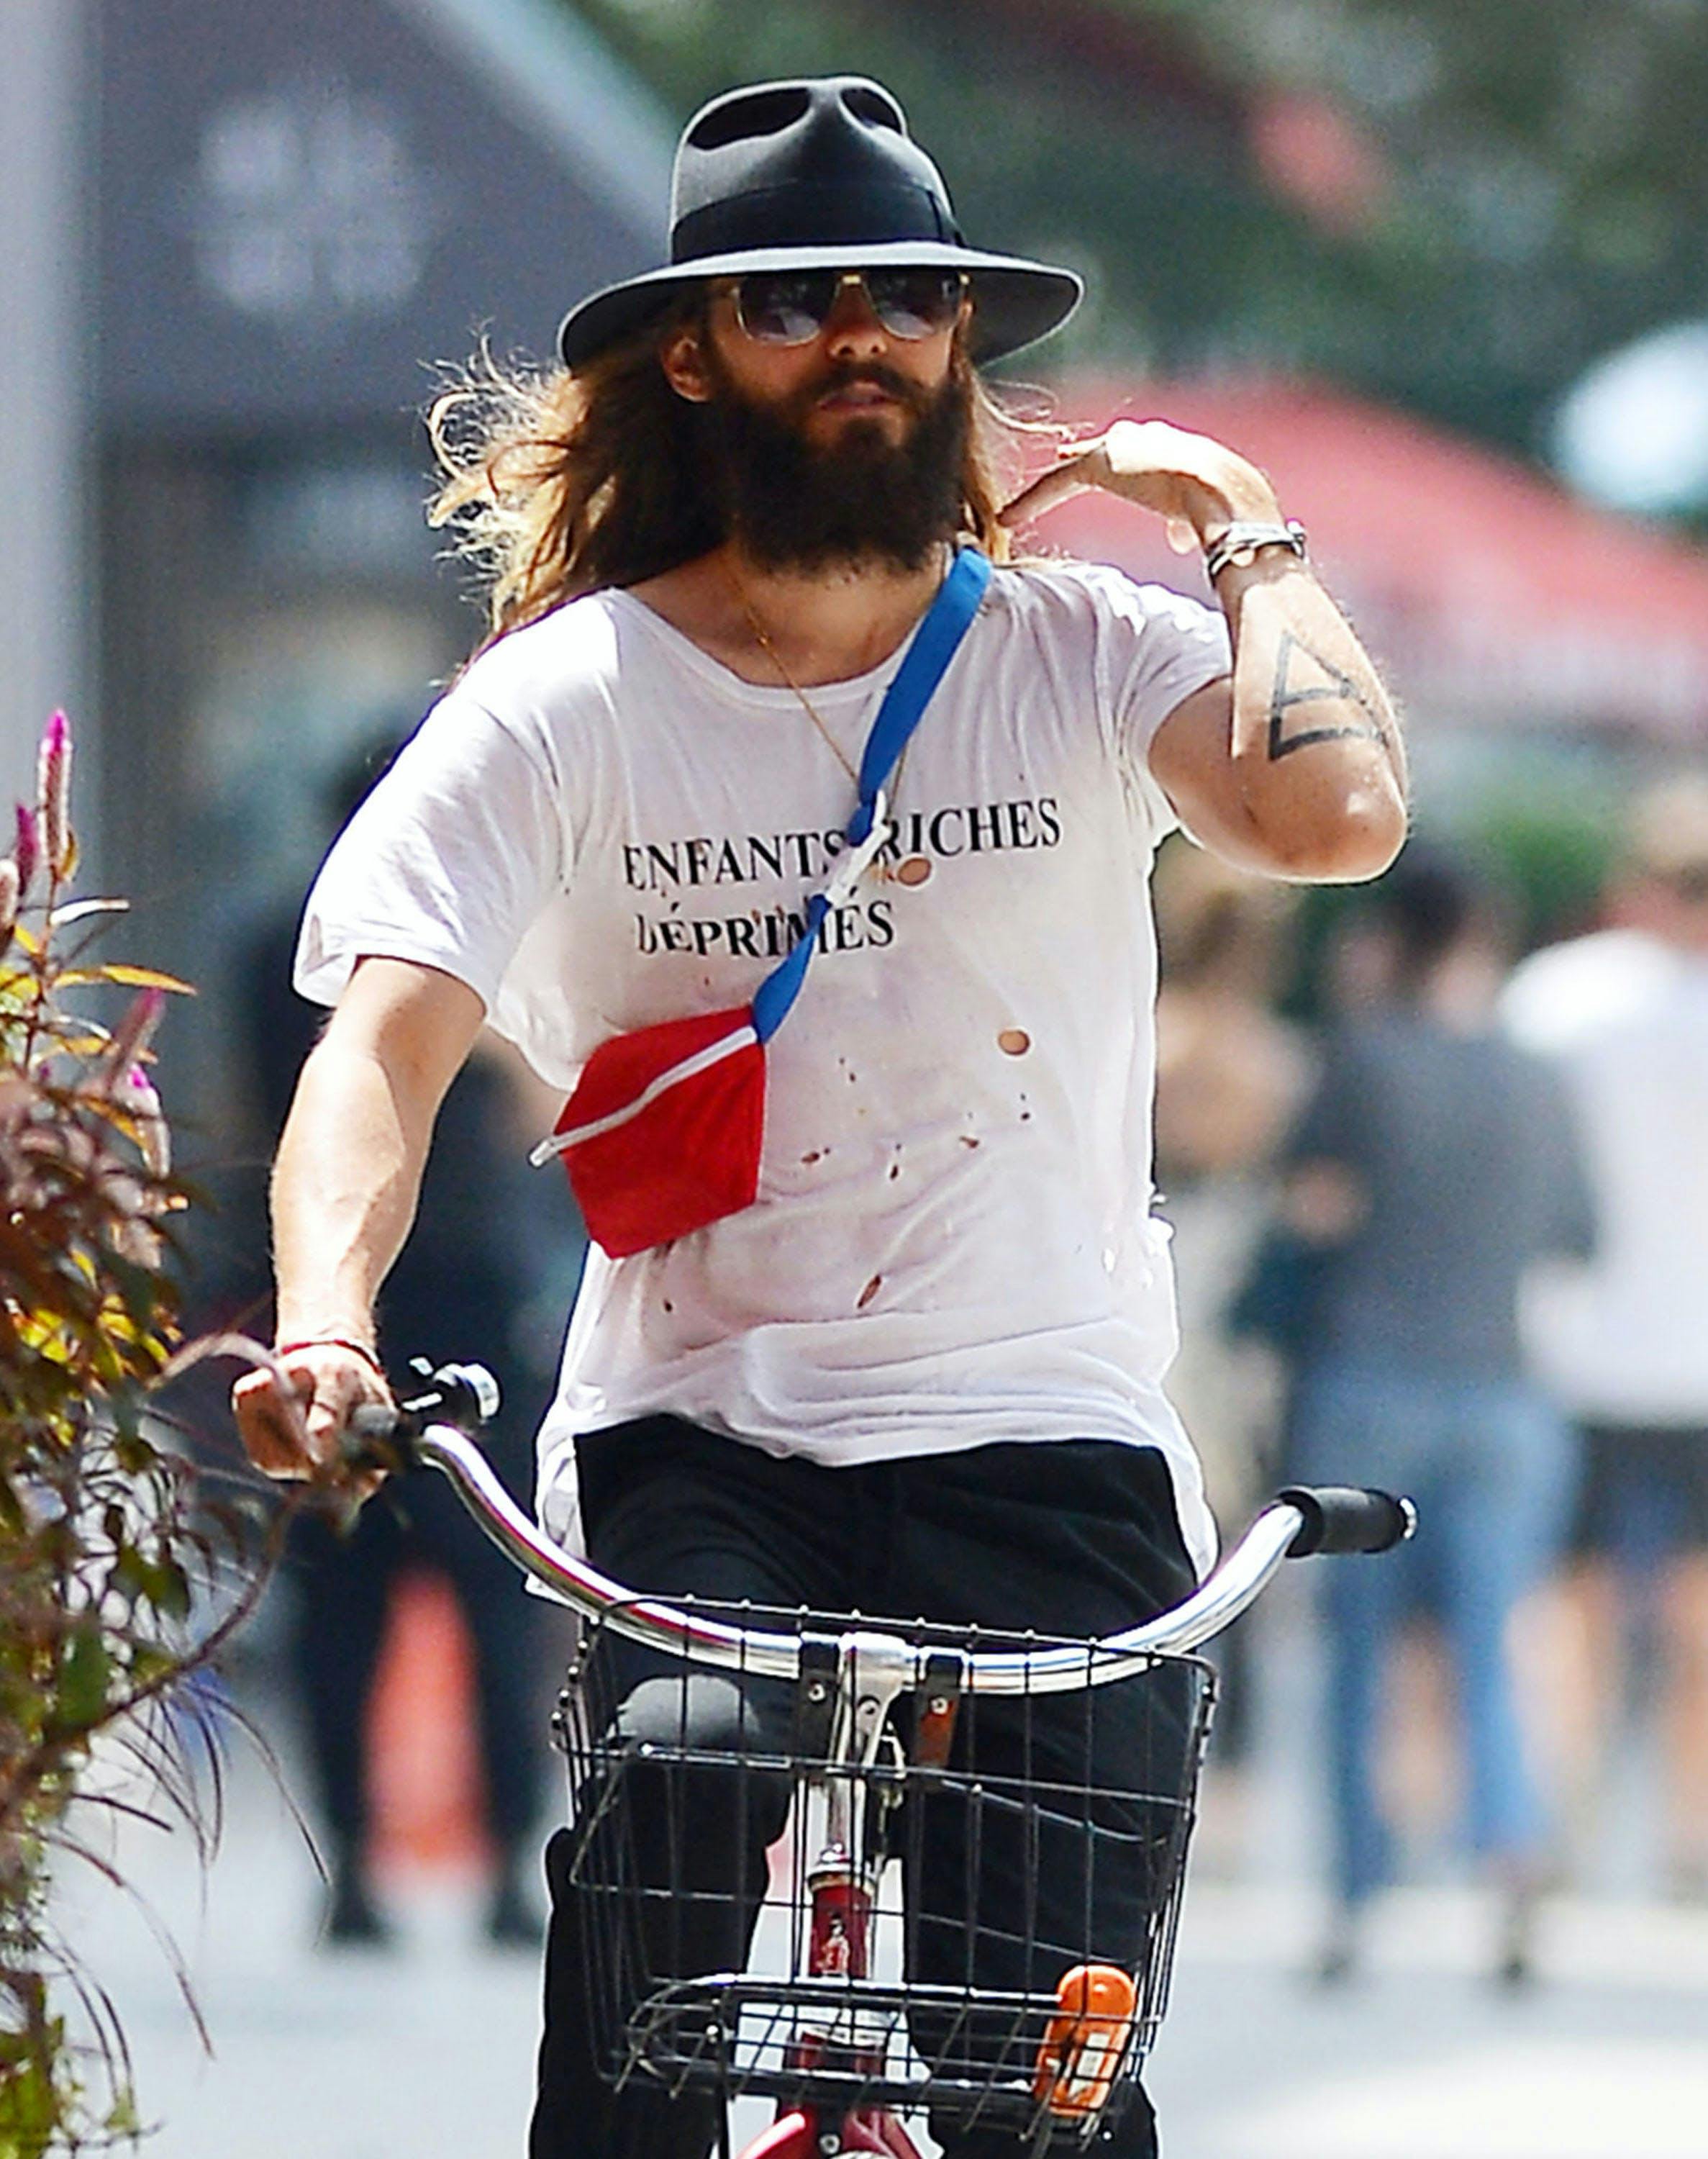 nueva york . person face bicycle transportation vehicle hat clothing sunglasses accessories beard